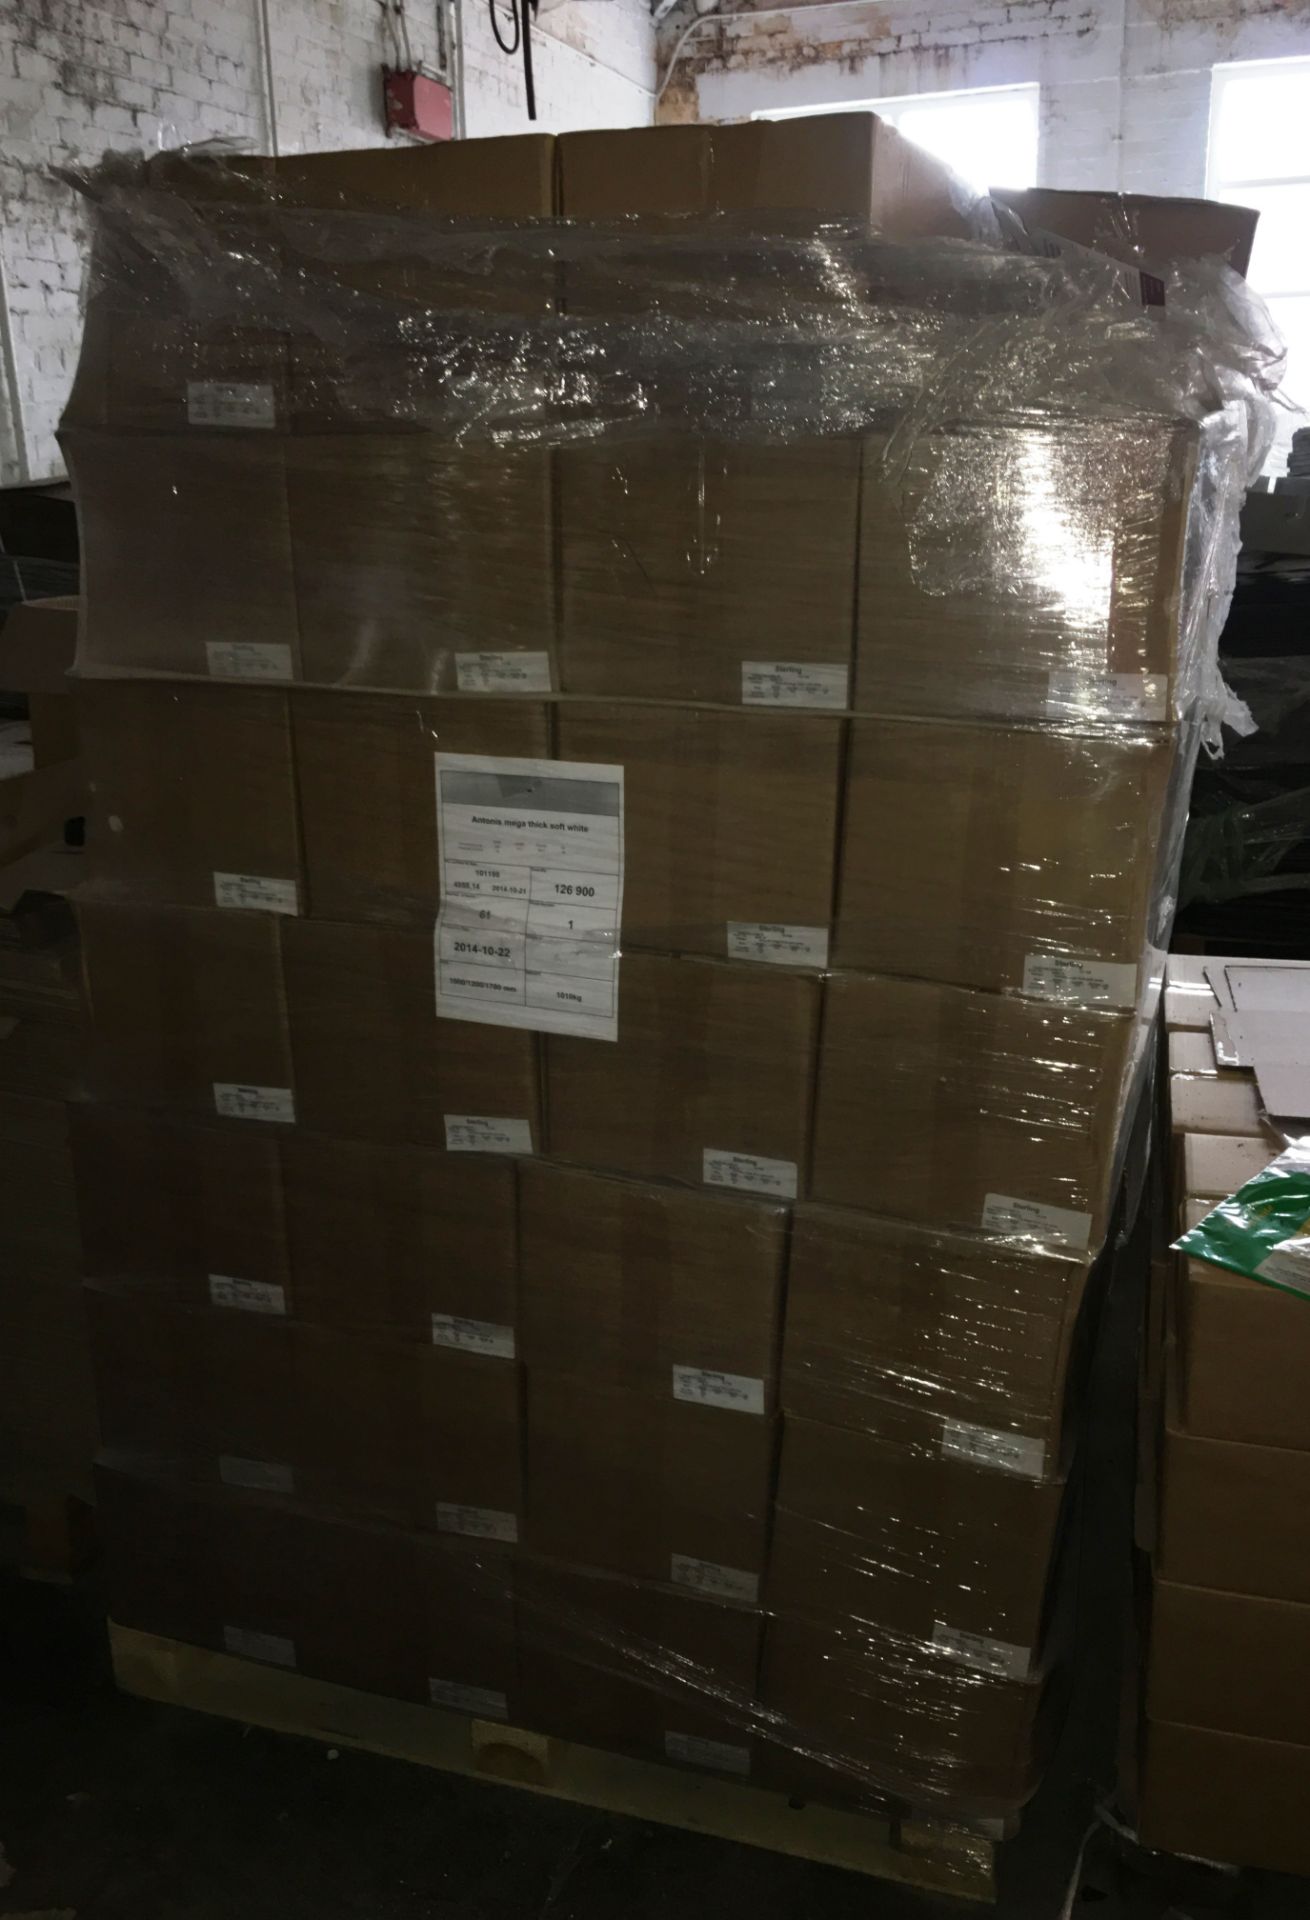 80 x Boxes of Sterling 'BRANDED' Plastic Packaging Bags - 2100 per Box - Image 2 of 5